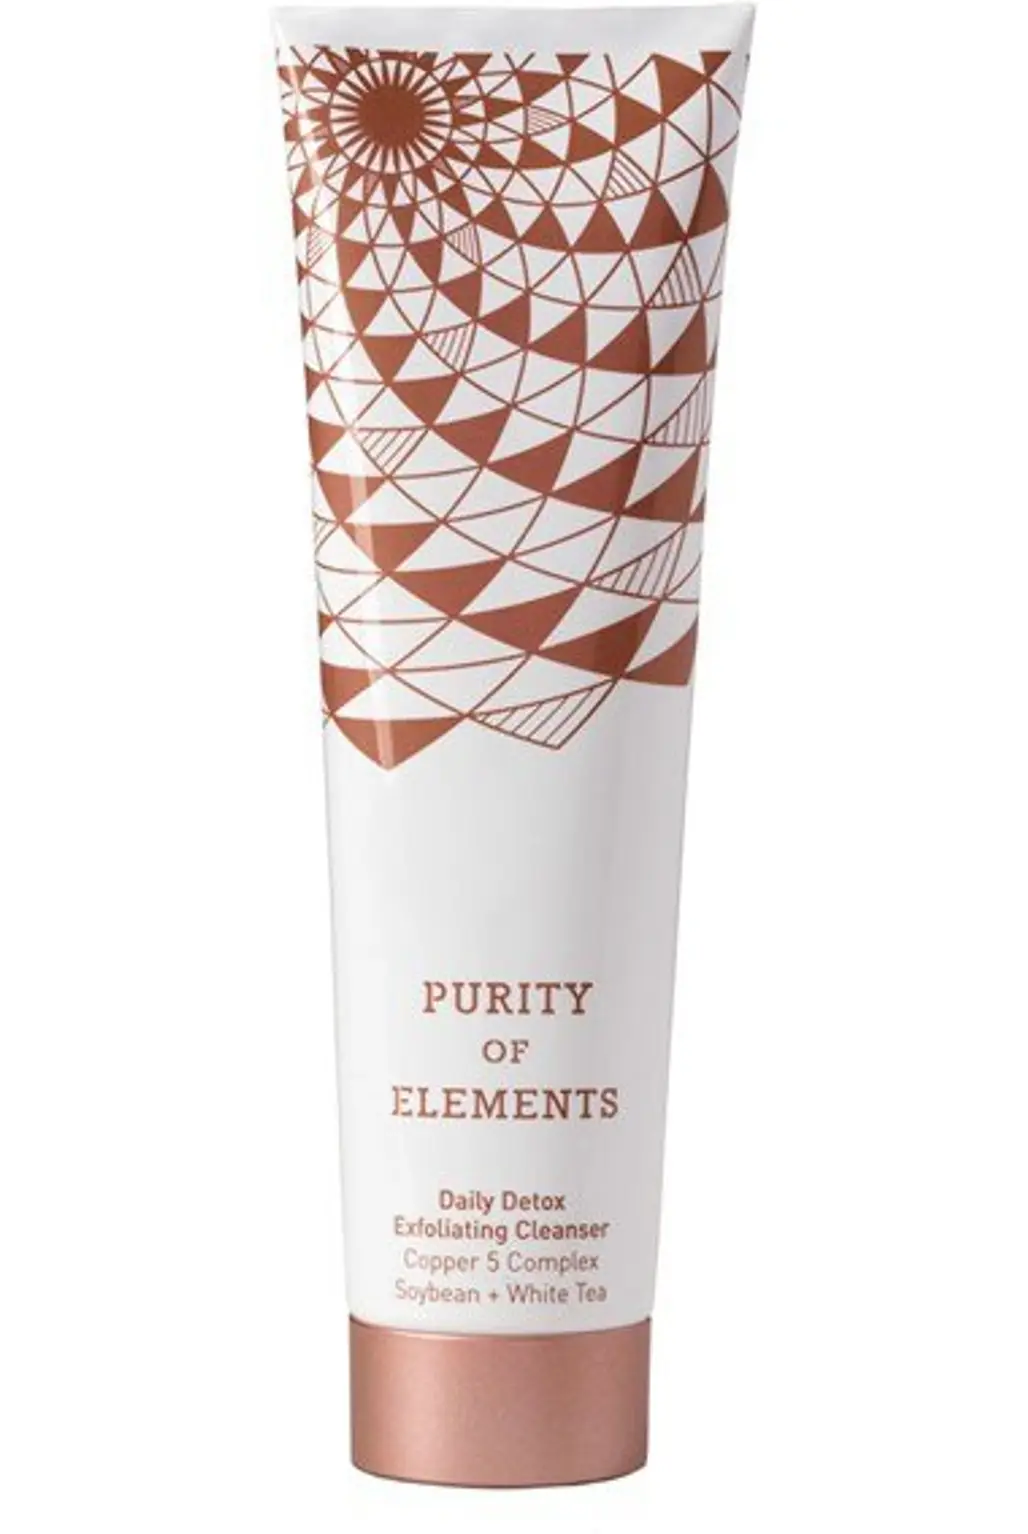 Purity of Elements Daily Detox Exfoliating Cleanser